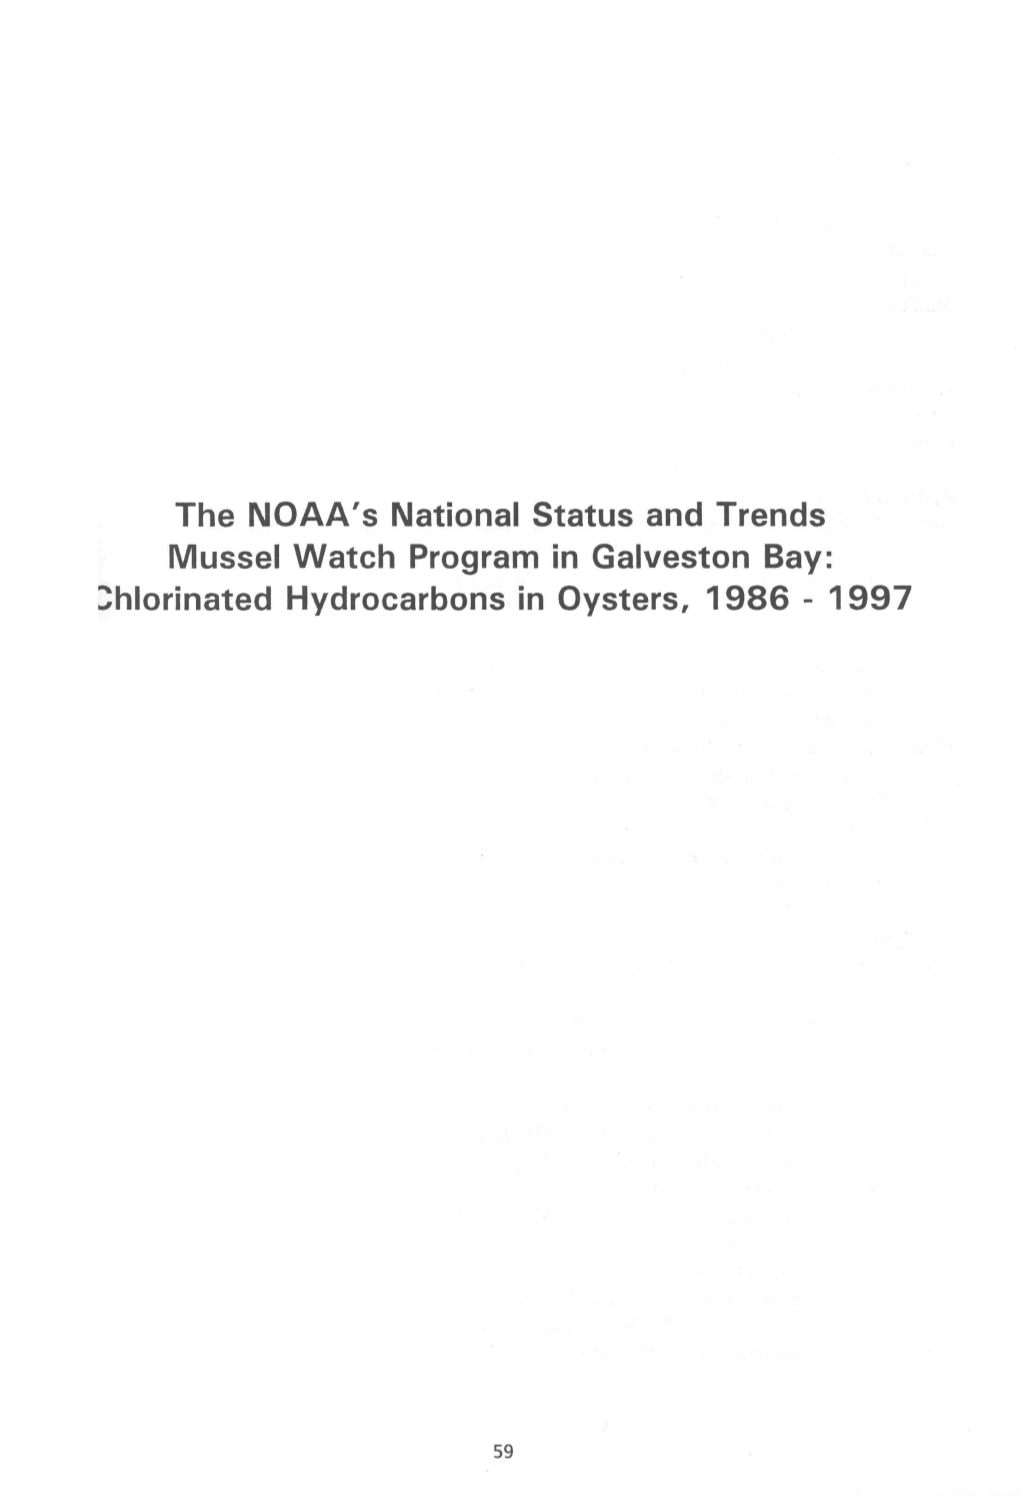 The NOAA's National Status and Trends Mussel Watch Program in Galveston Bay: Chlorinated Hydrocarbons in Oysters, 1986 - 1997